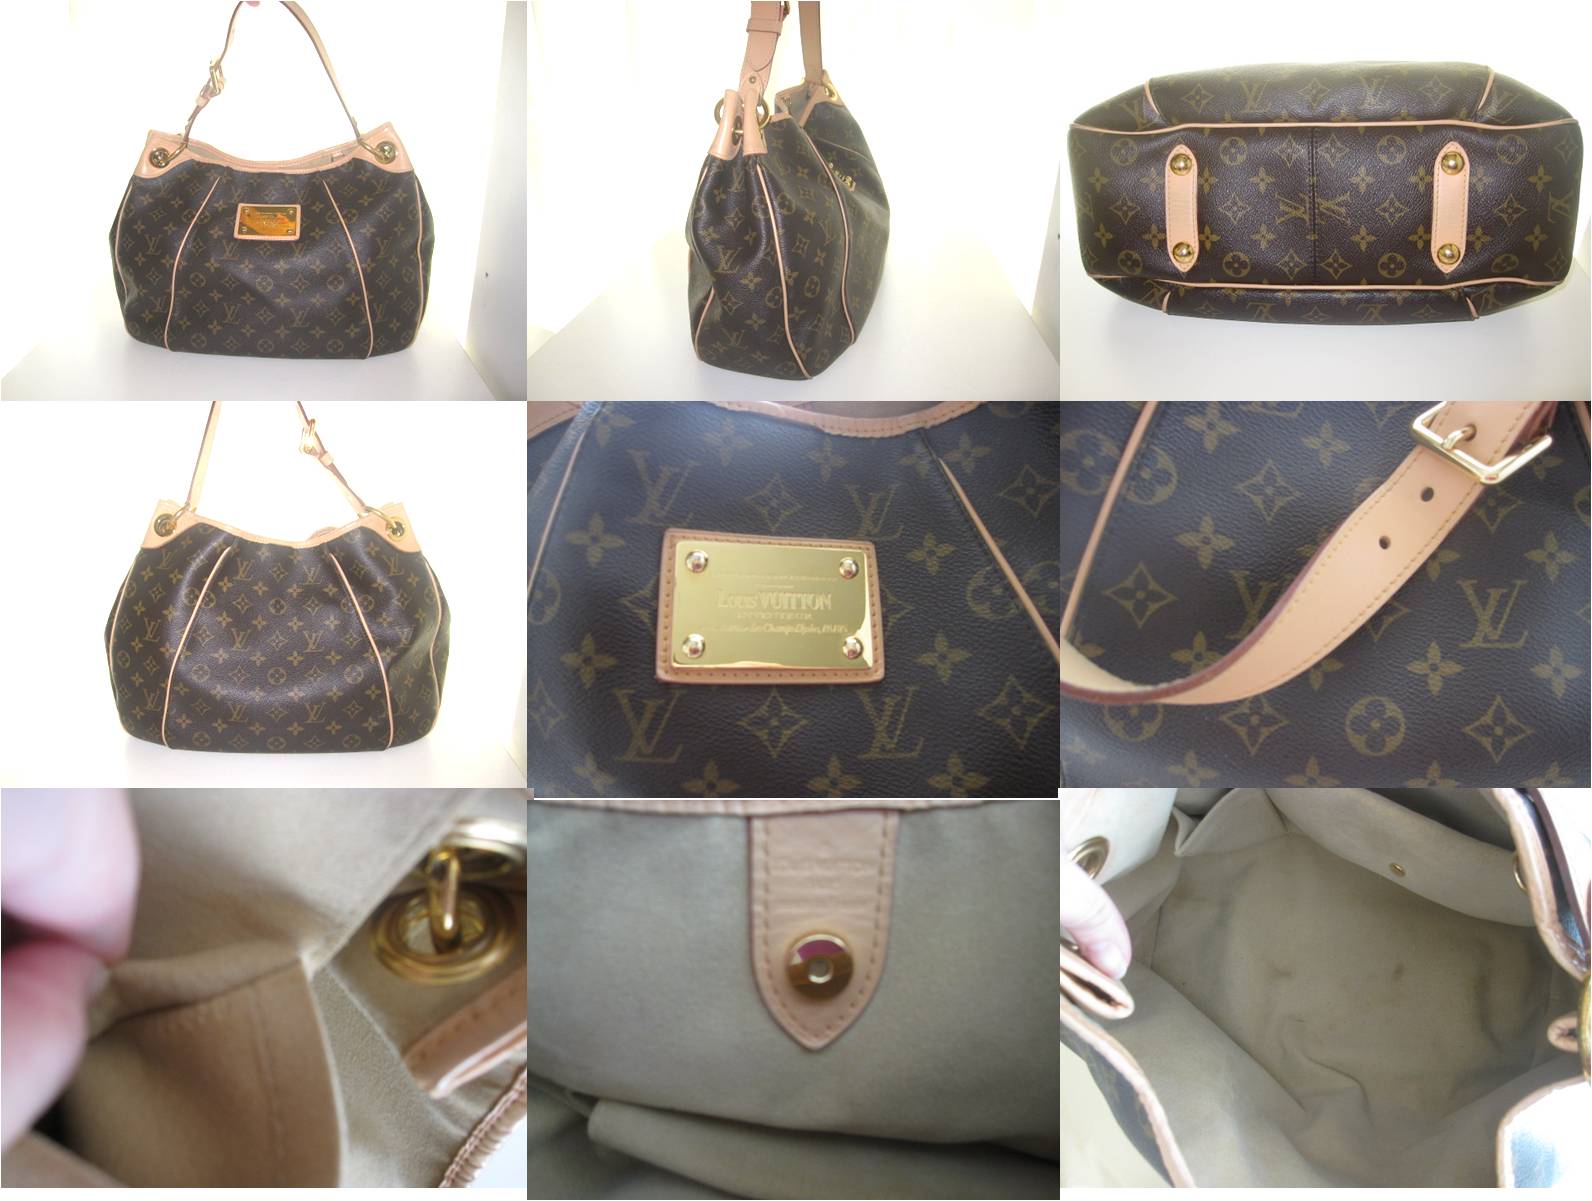 The Bags Affairs ~ Satisfy your lust for designer bags: FURTHER MARK DOWN! RM2450!